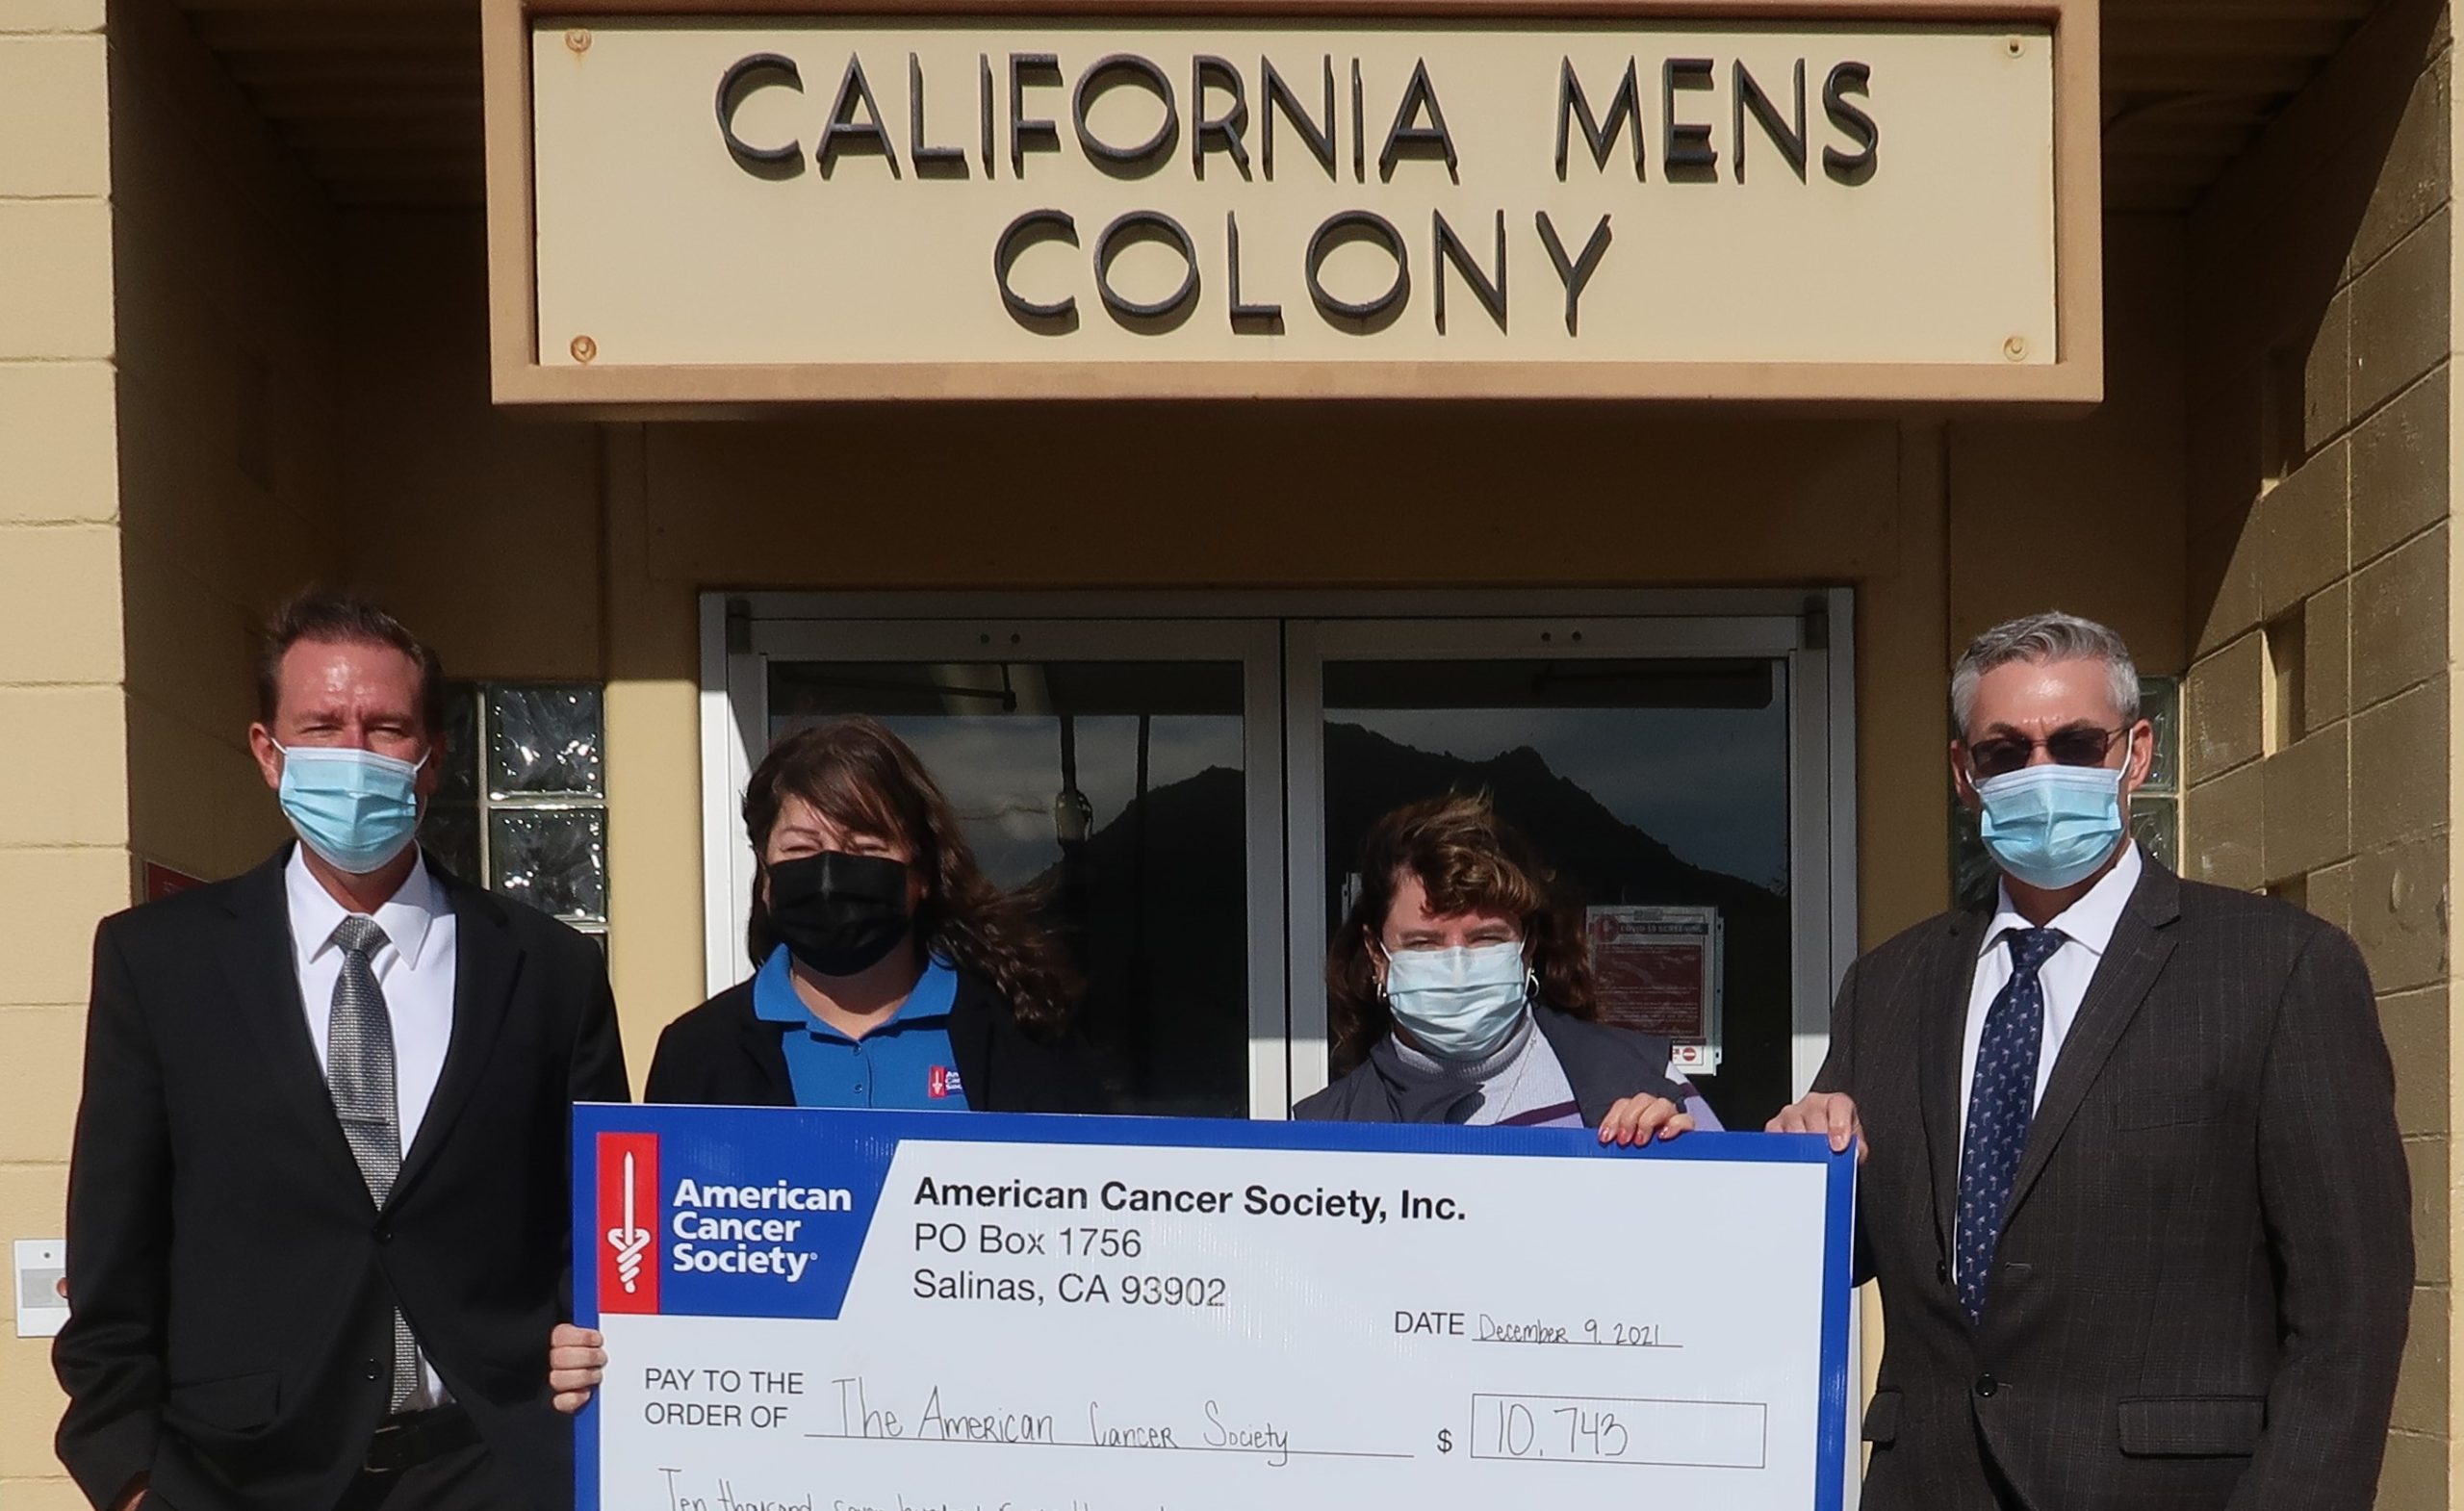 California Men's Colony staff present a check to American Cancer Society.